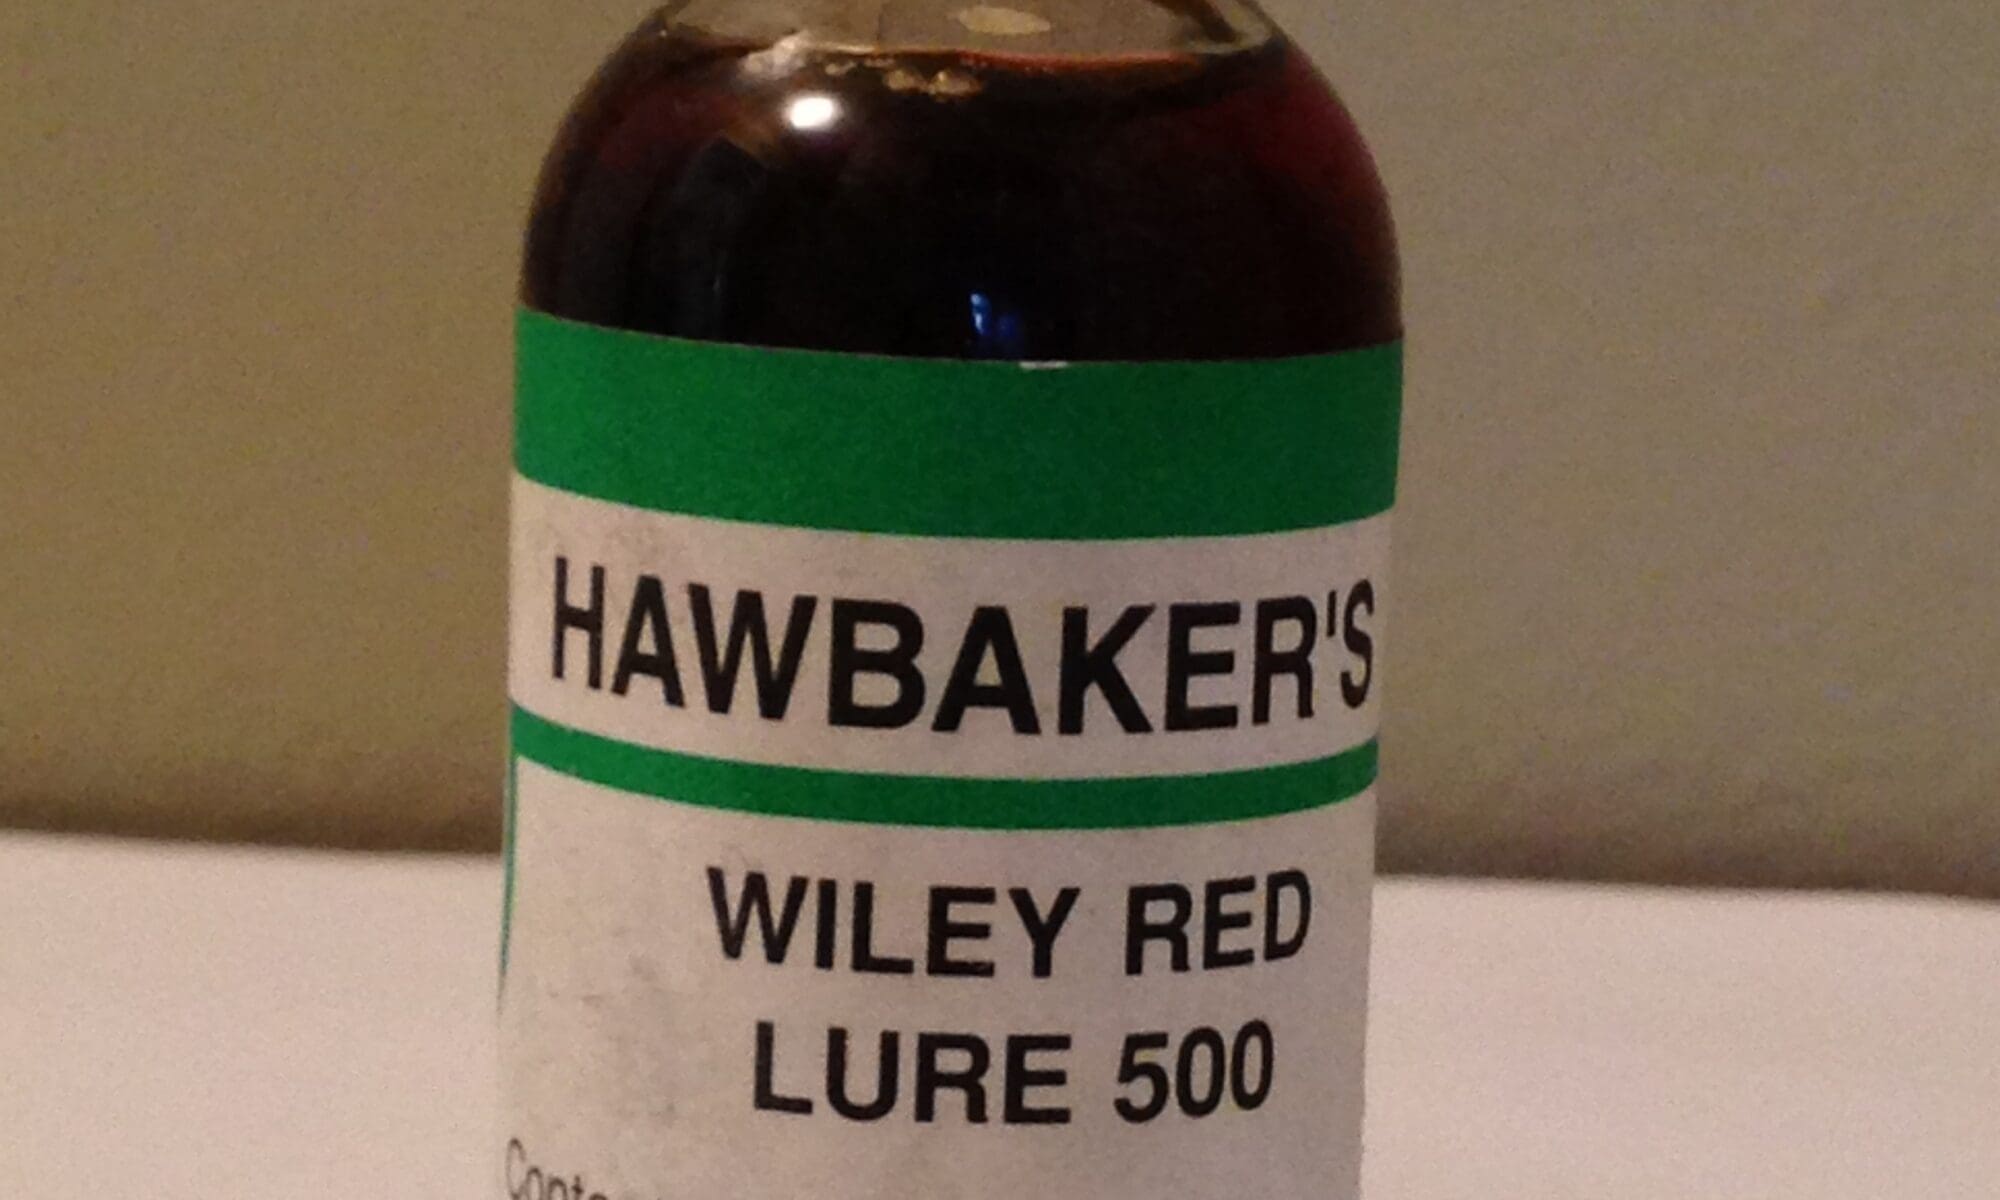 Hawbaker's Wiley Red Lure 500 (1 oz.)